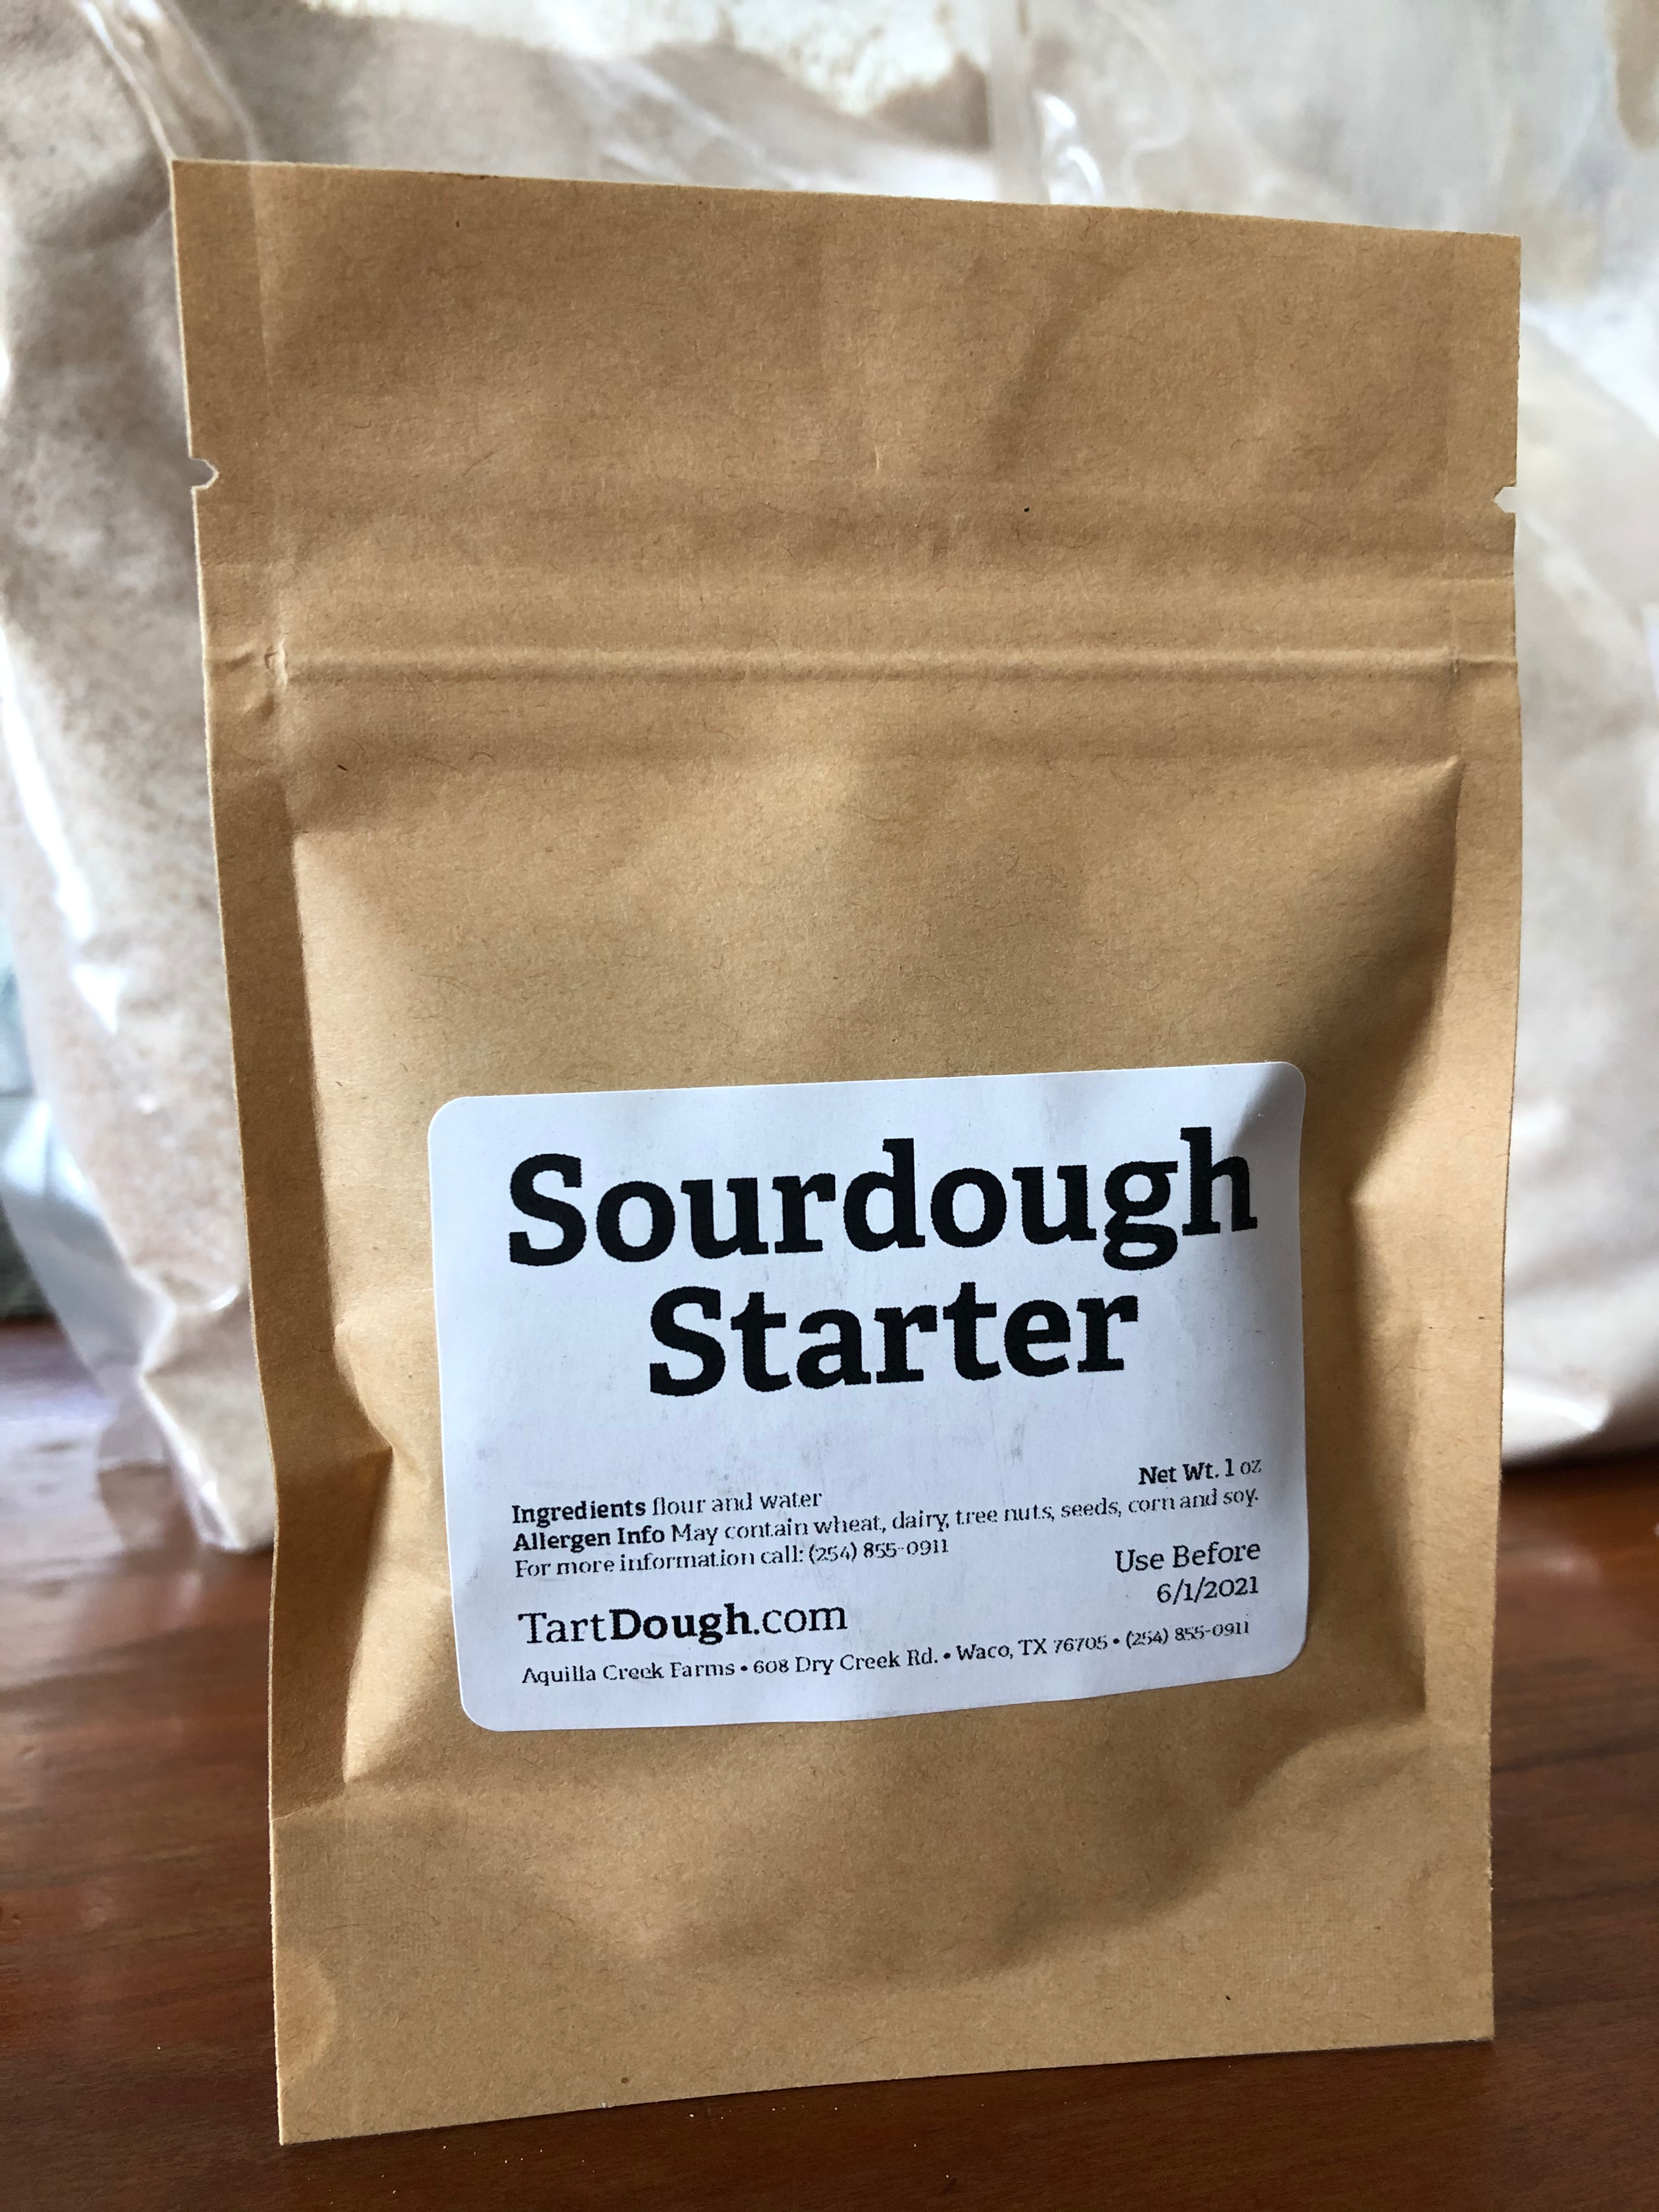 Dehydrated Sourdough Starter made with Organic Flour